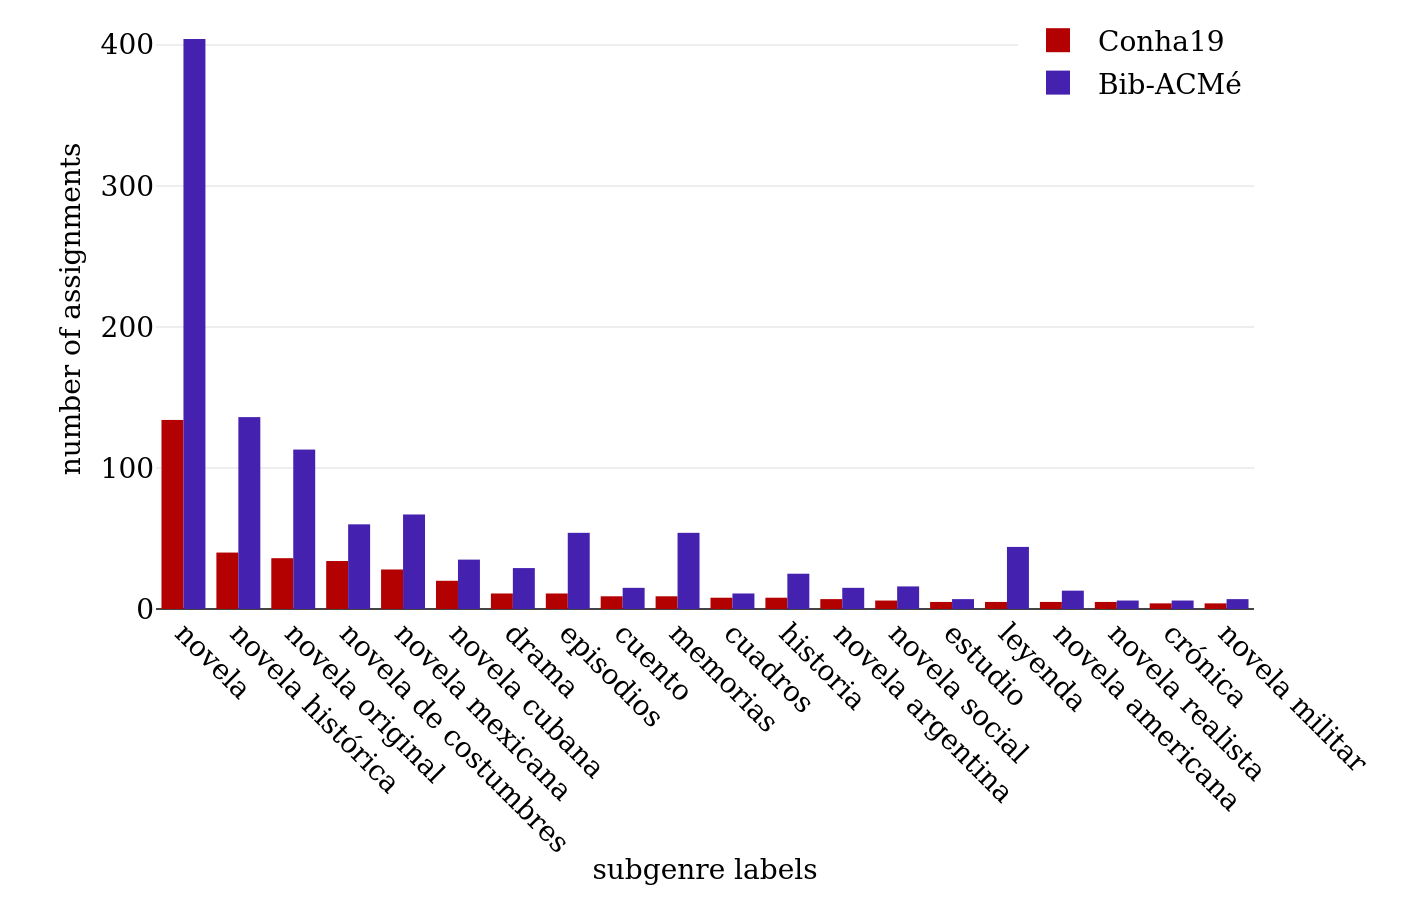 Top 20 most frequent explicit subgenre labels in the corpus.